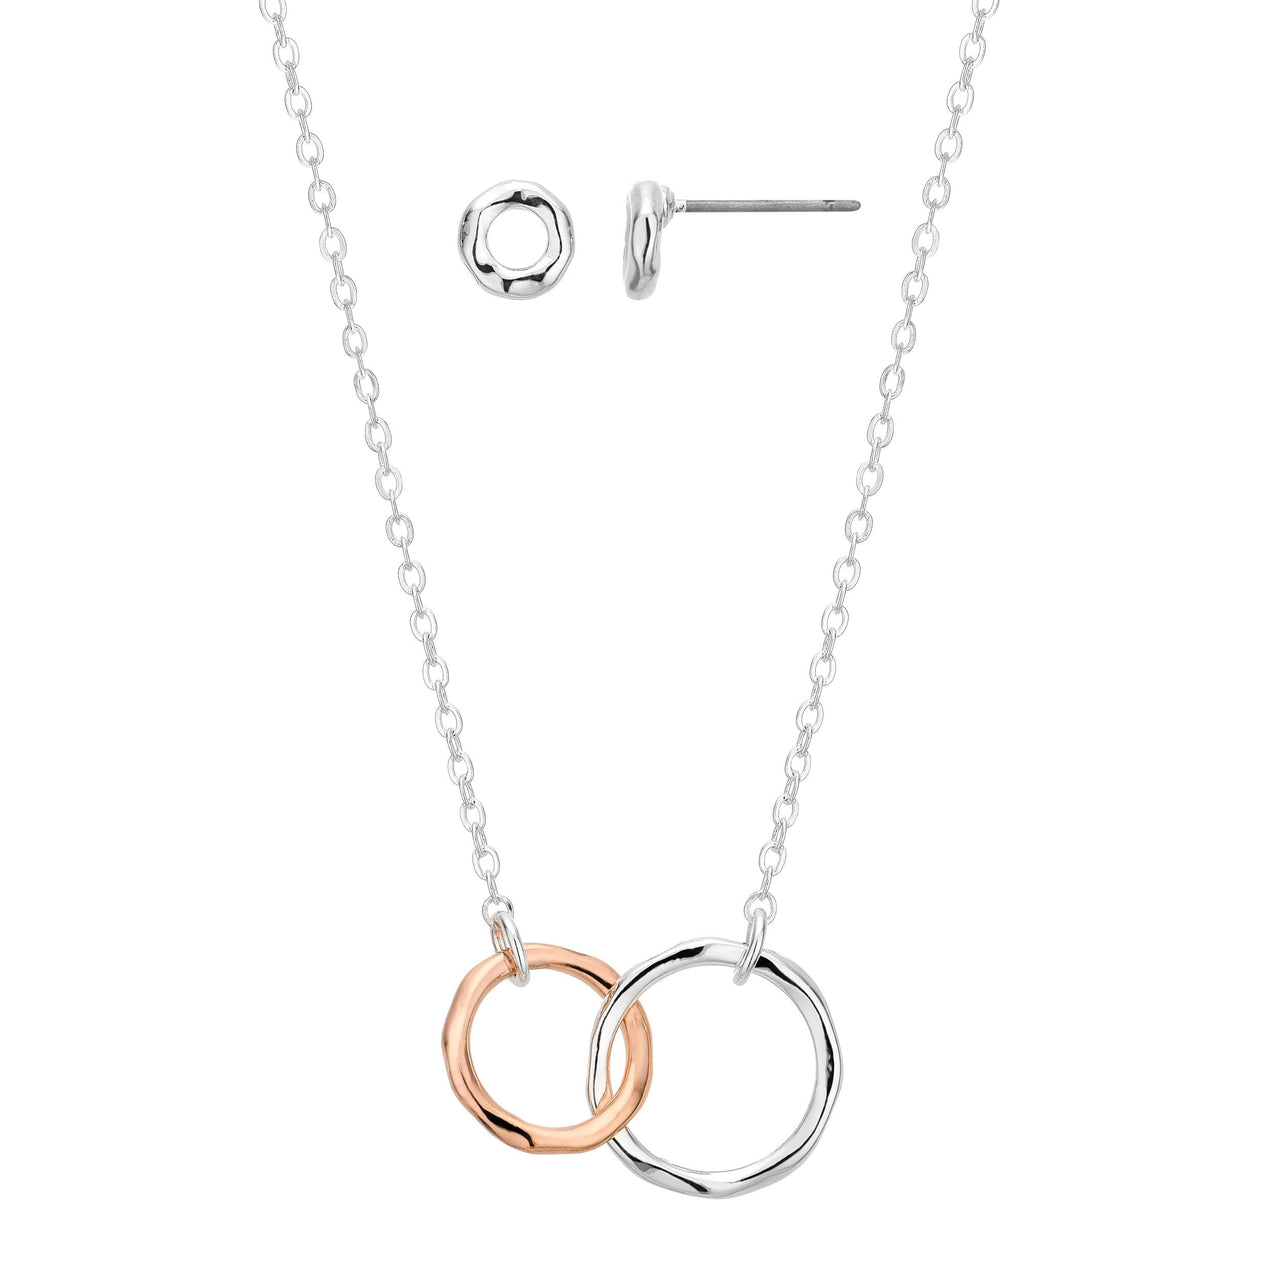 Entwined Rings Necklace & Earrings Set